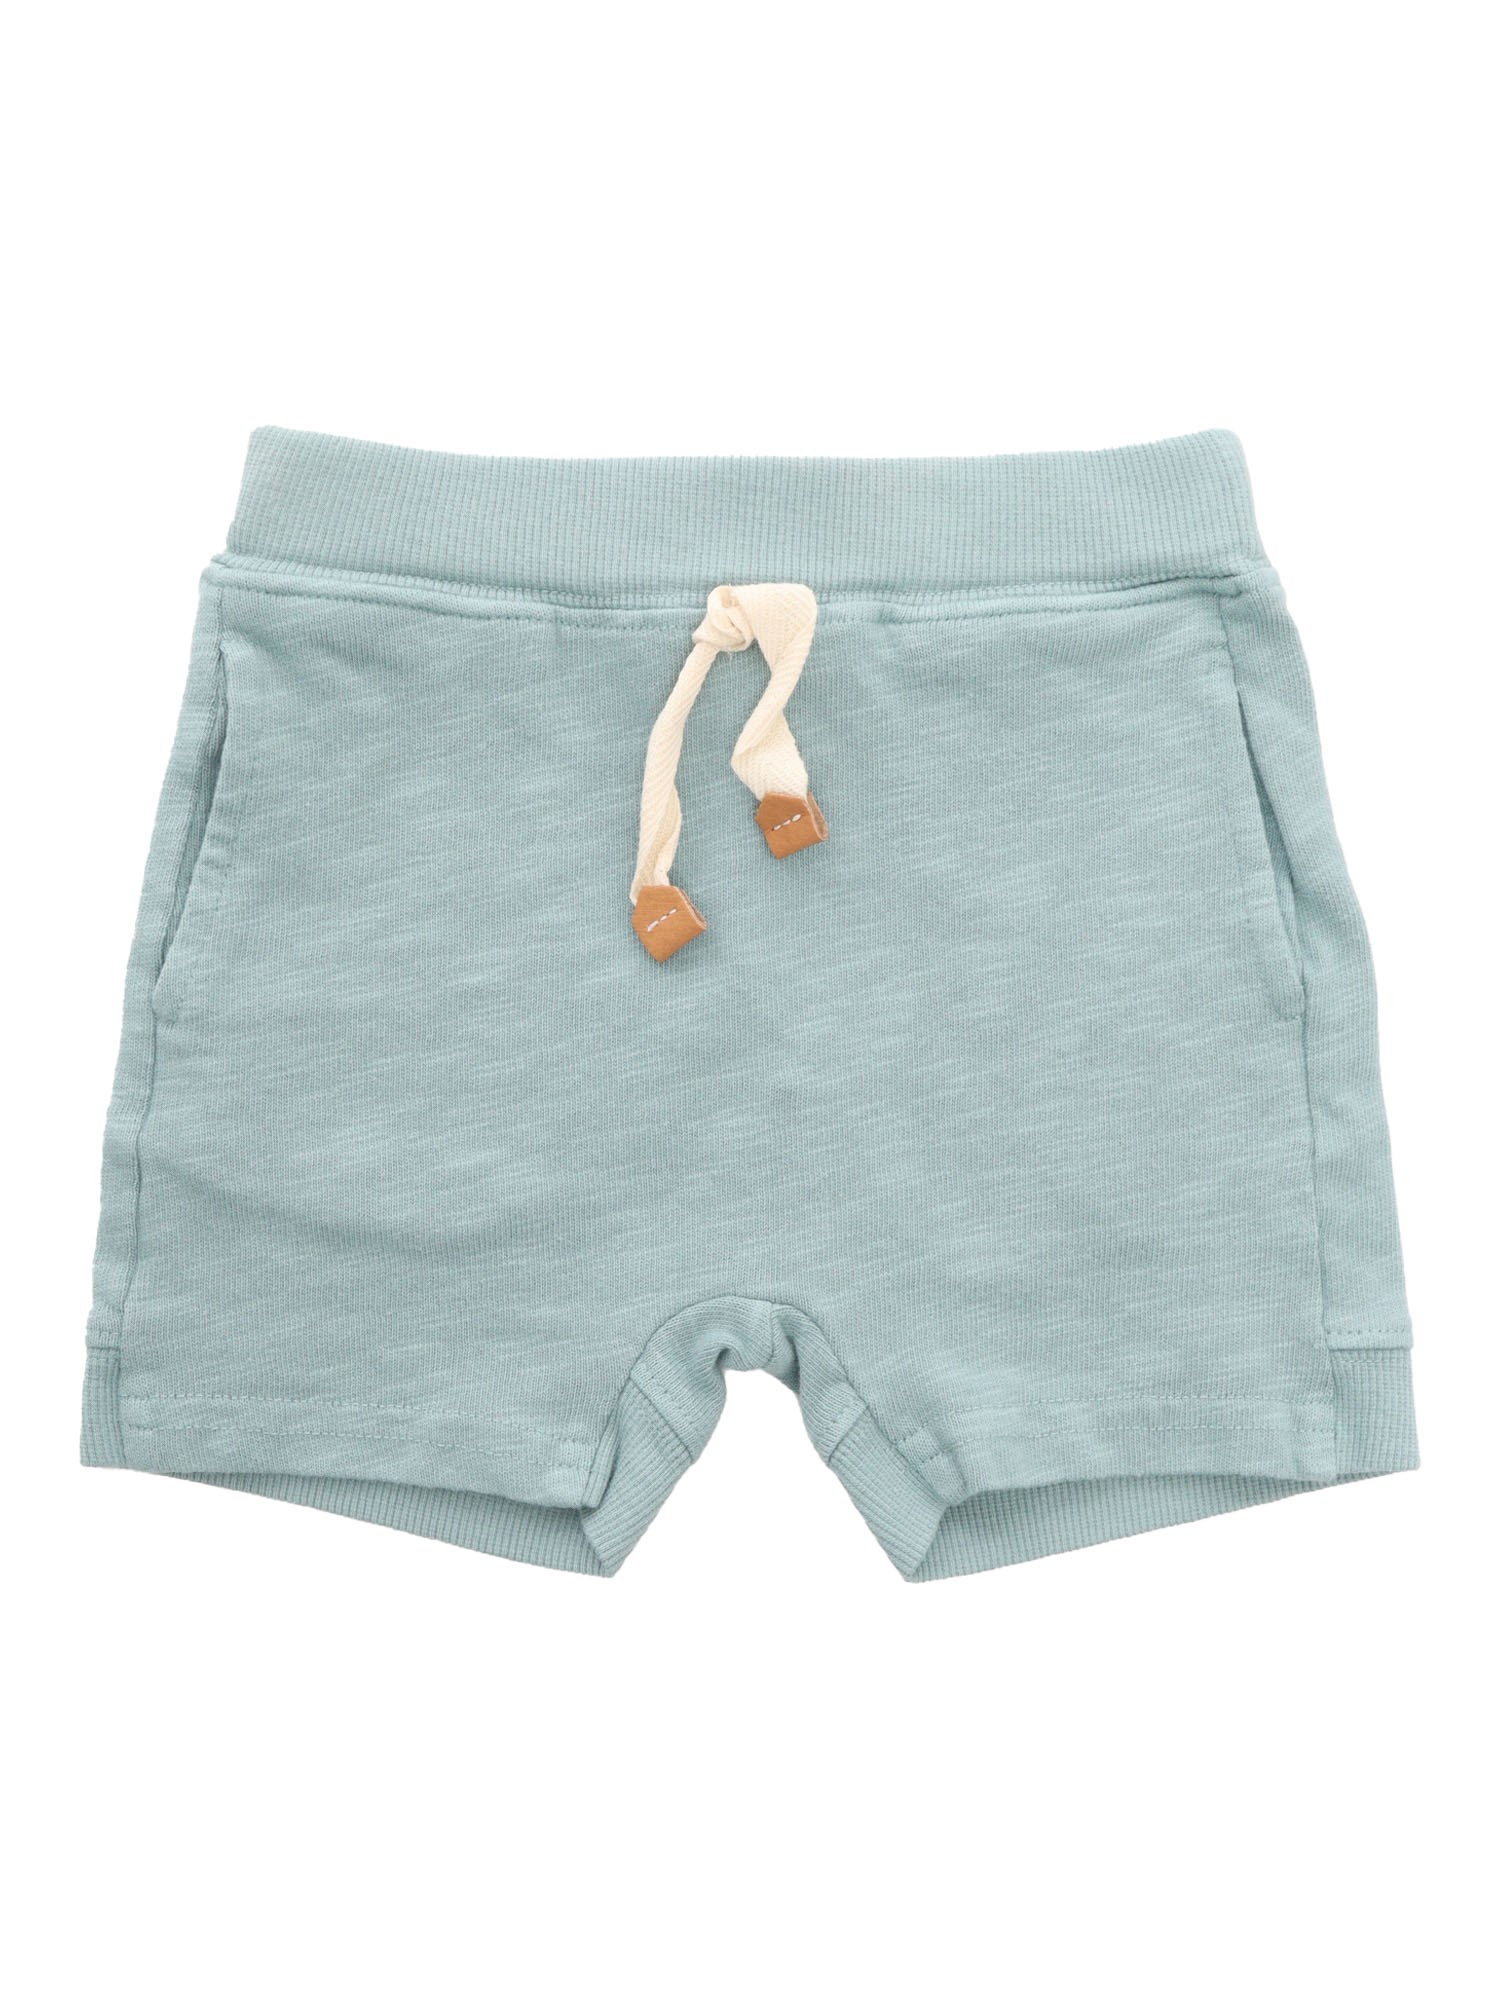 One More In The Family Light Blue Bermuda Shorts In Gray